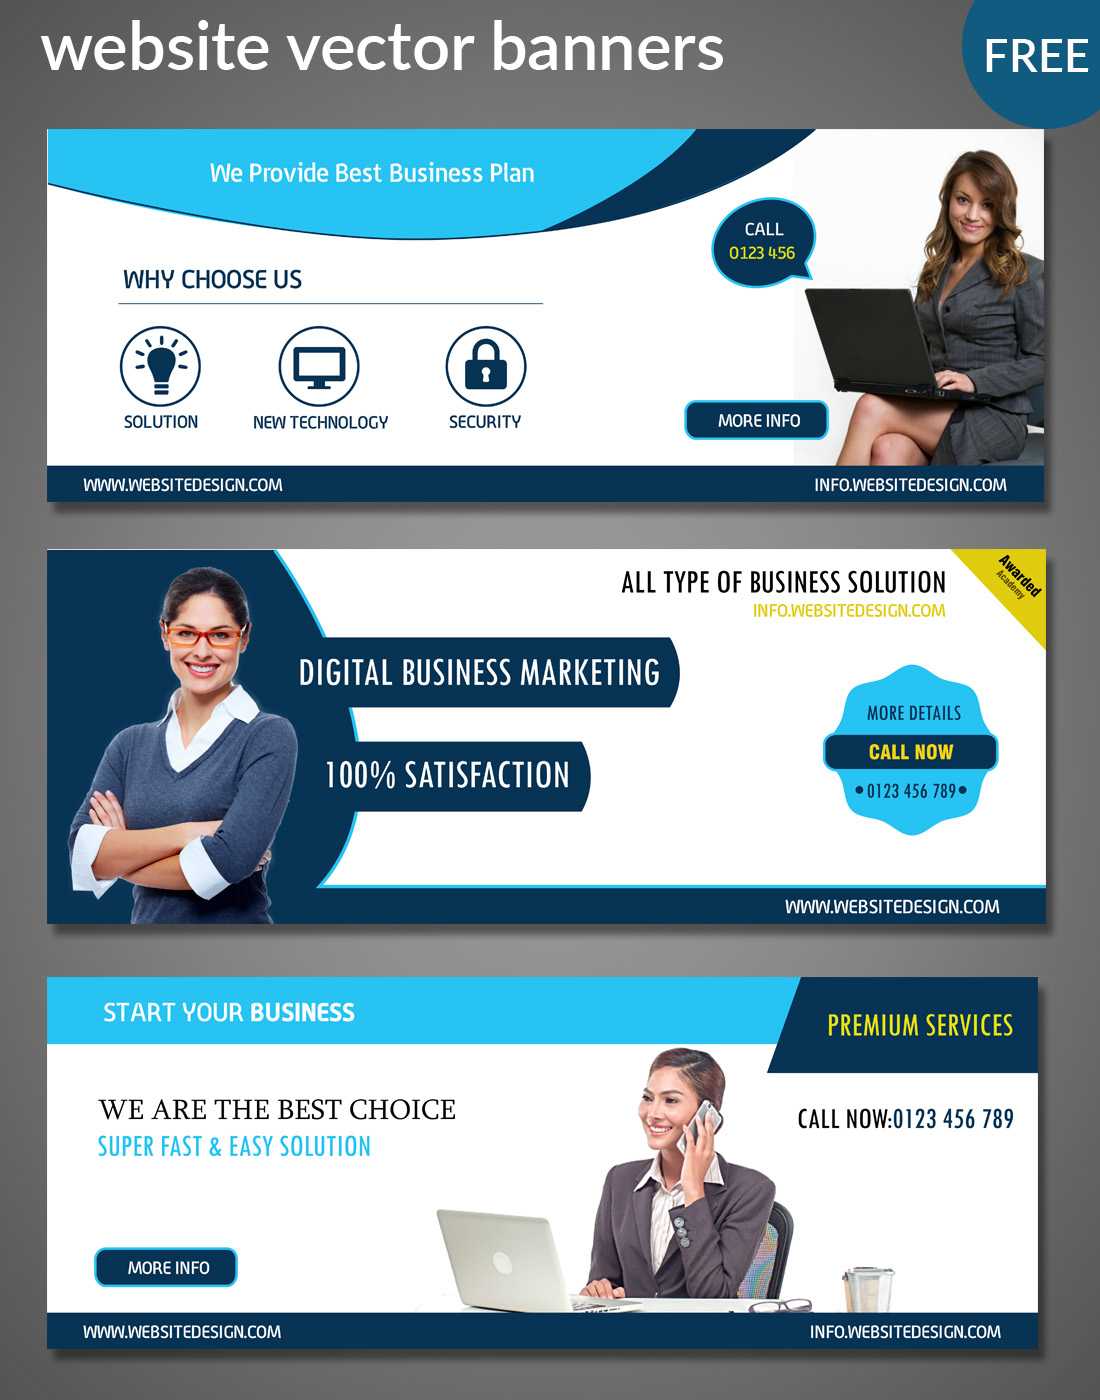 Website Banners Templates For Website Banner Templates Free Download